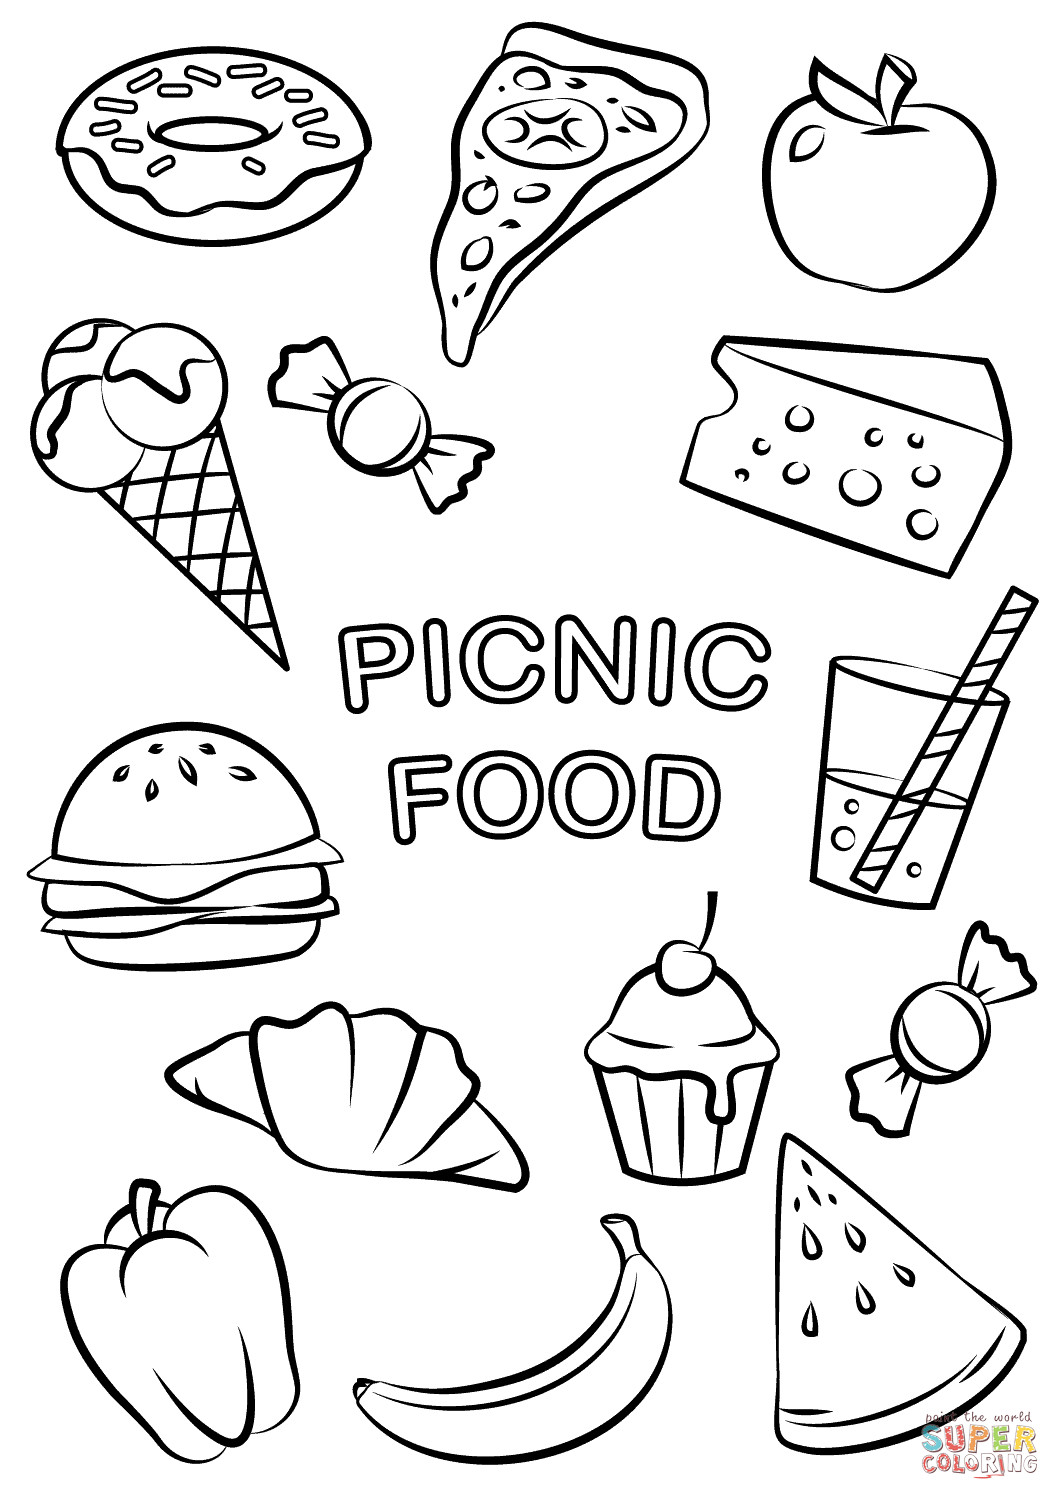 Food Coloring Pages For Kids
 Picnic Food coloring page